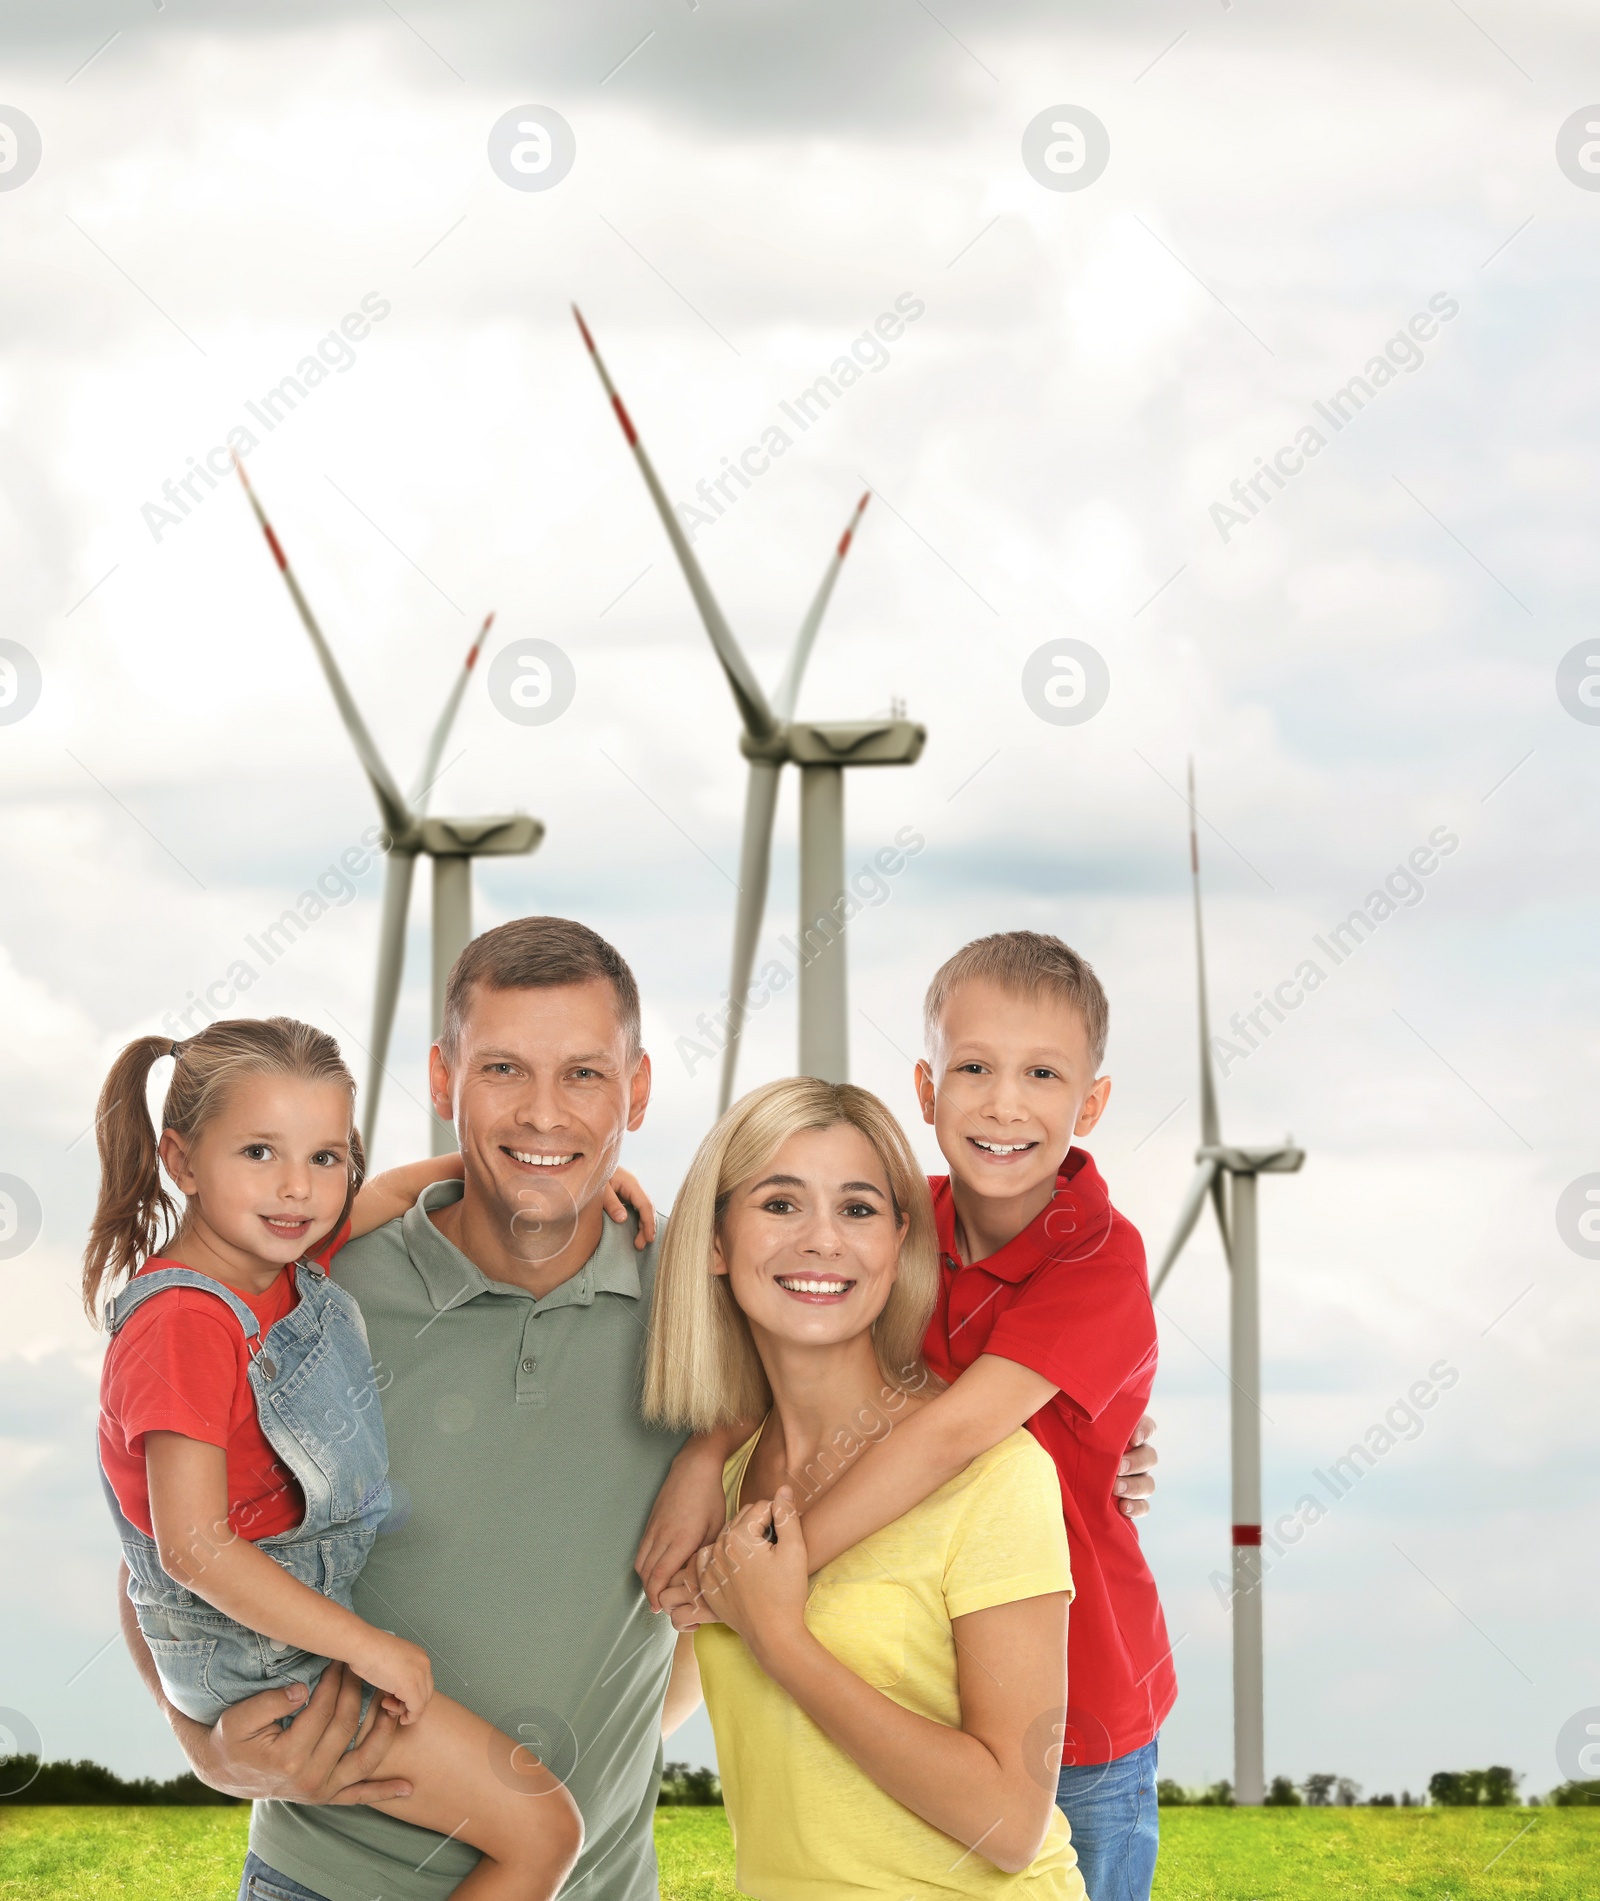 Image of Happy family with children and view of wind energy turbines